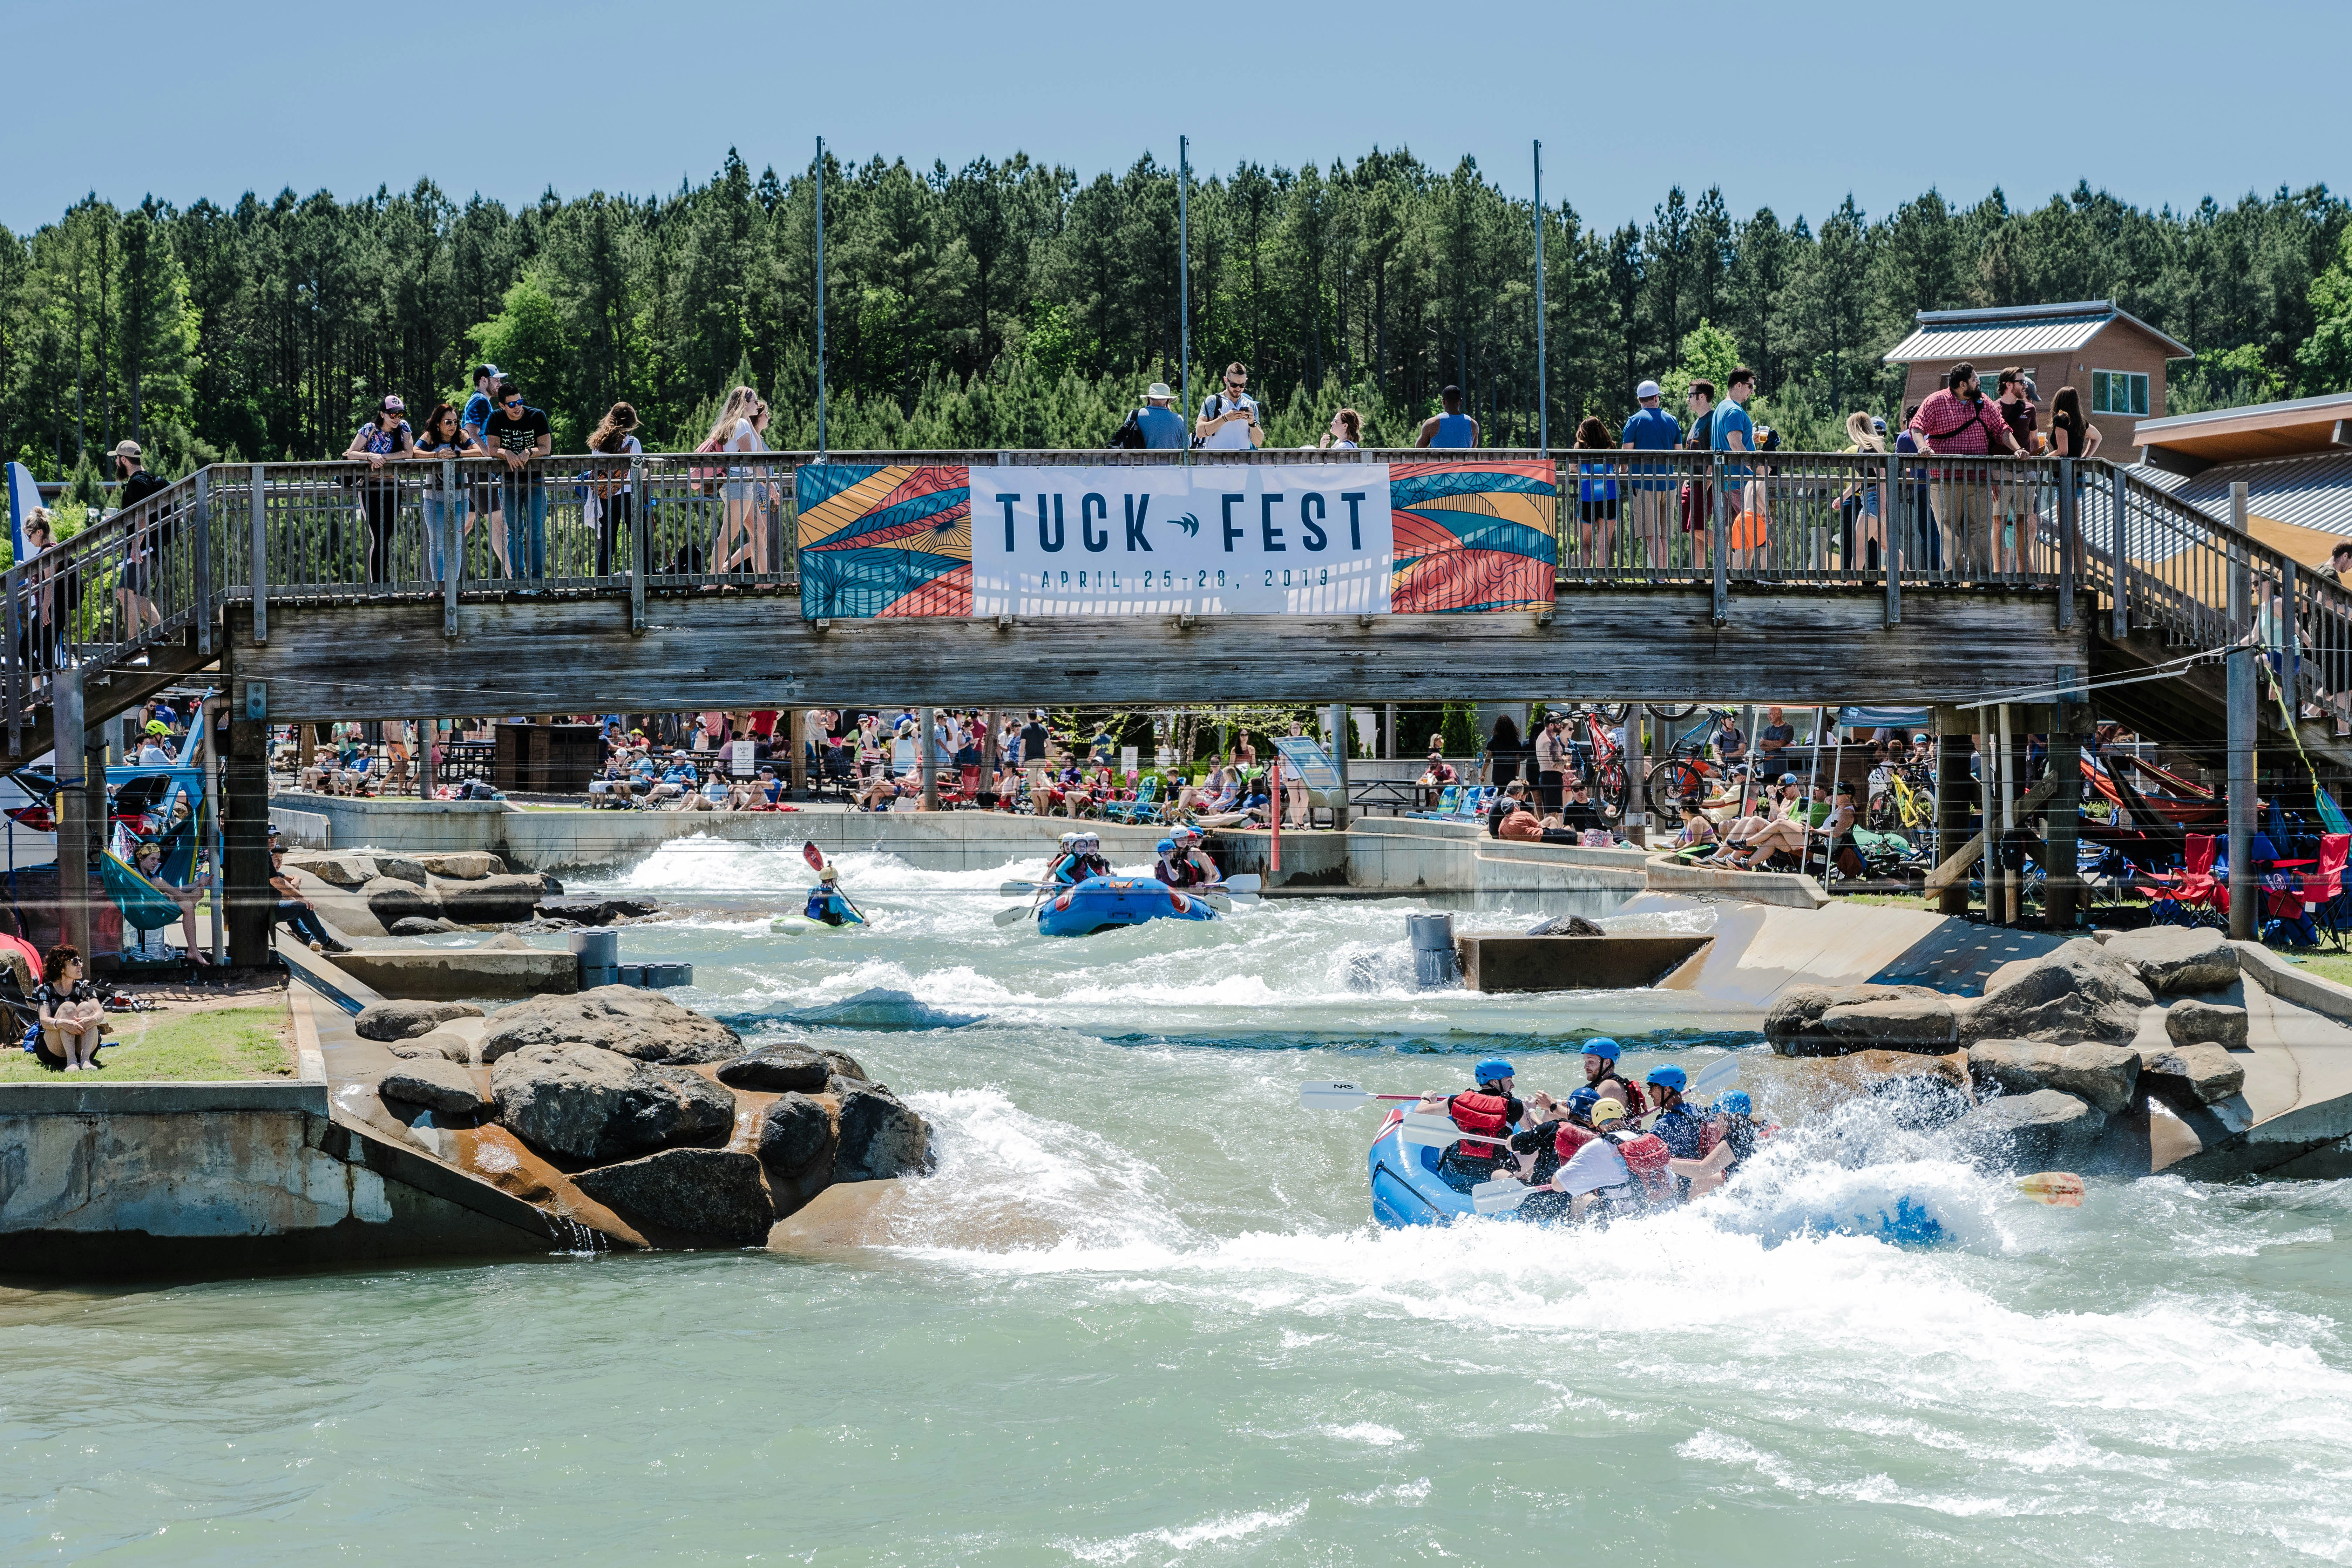 A group of people in a large rubber raft paddle on rushing white water at the US National Whitewater Center in Charlotte, NC. There is a large sign that says "Tuck Fest" hanging from a wooden bridge above the water.